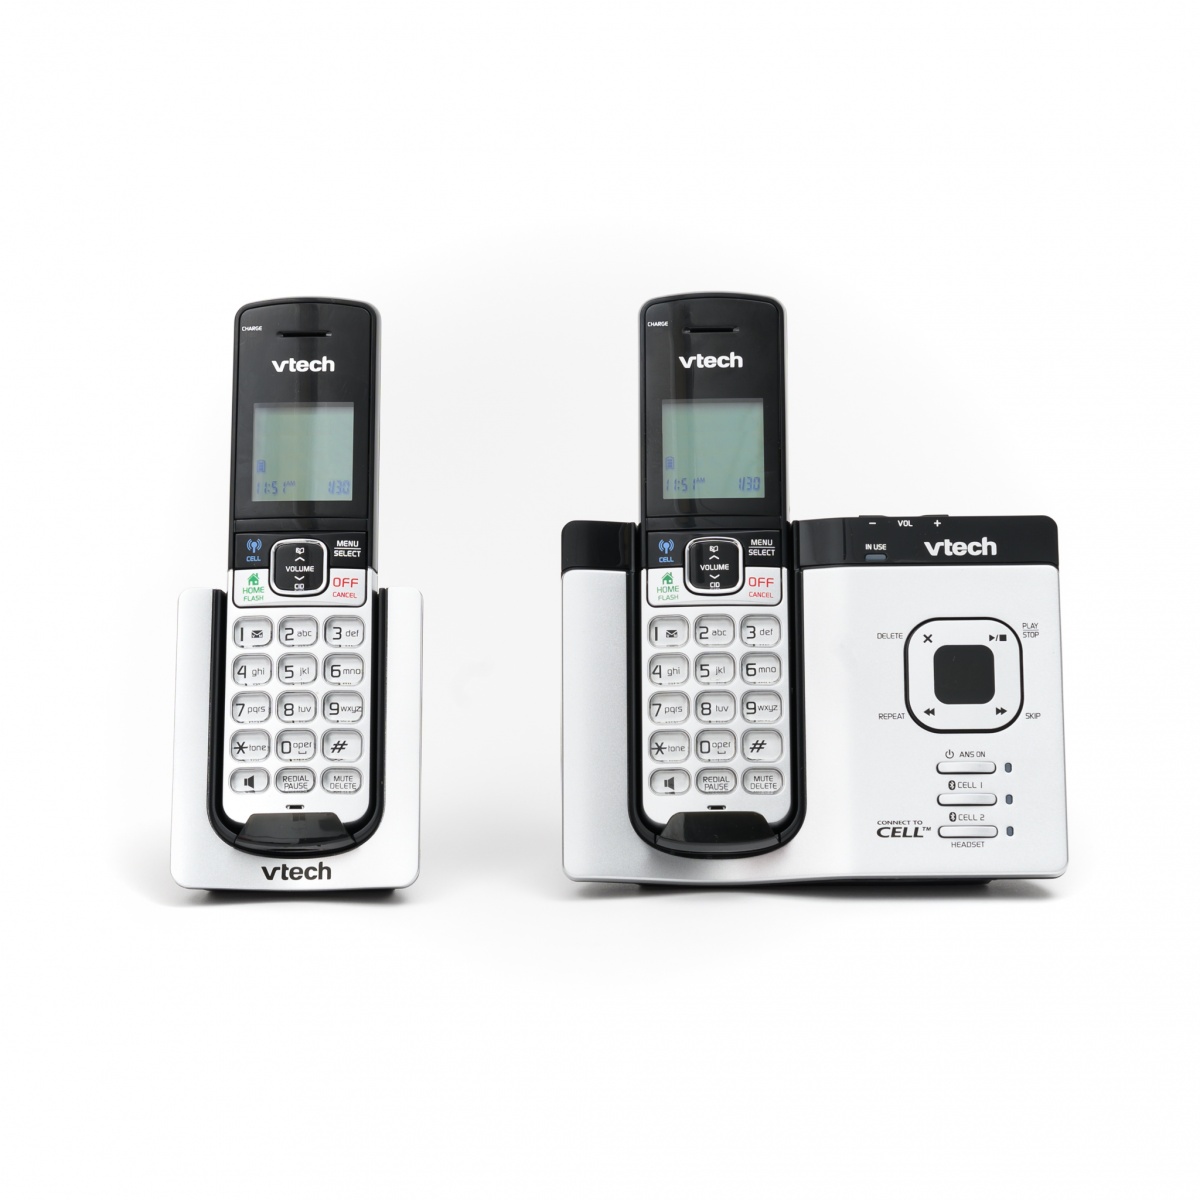 vtech ds6621-2 cordless phone review